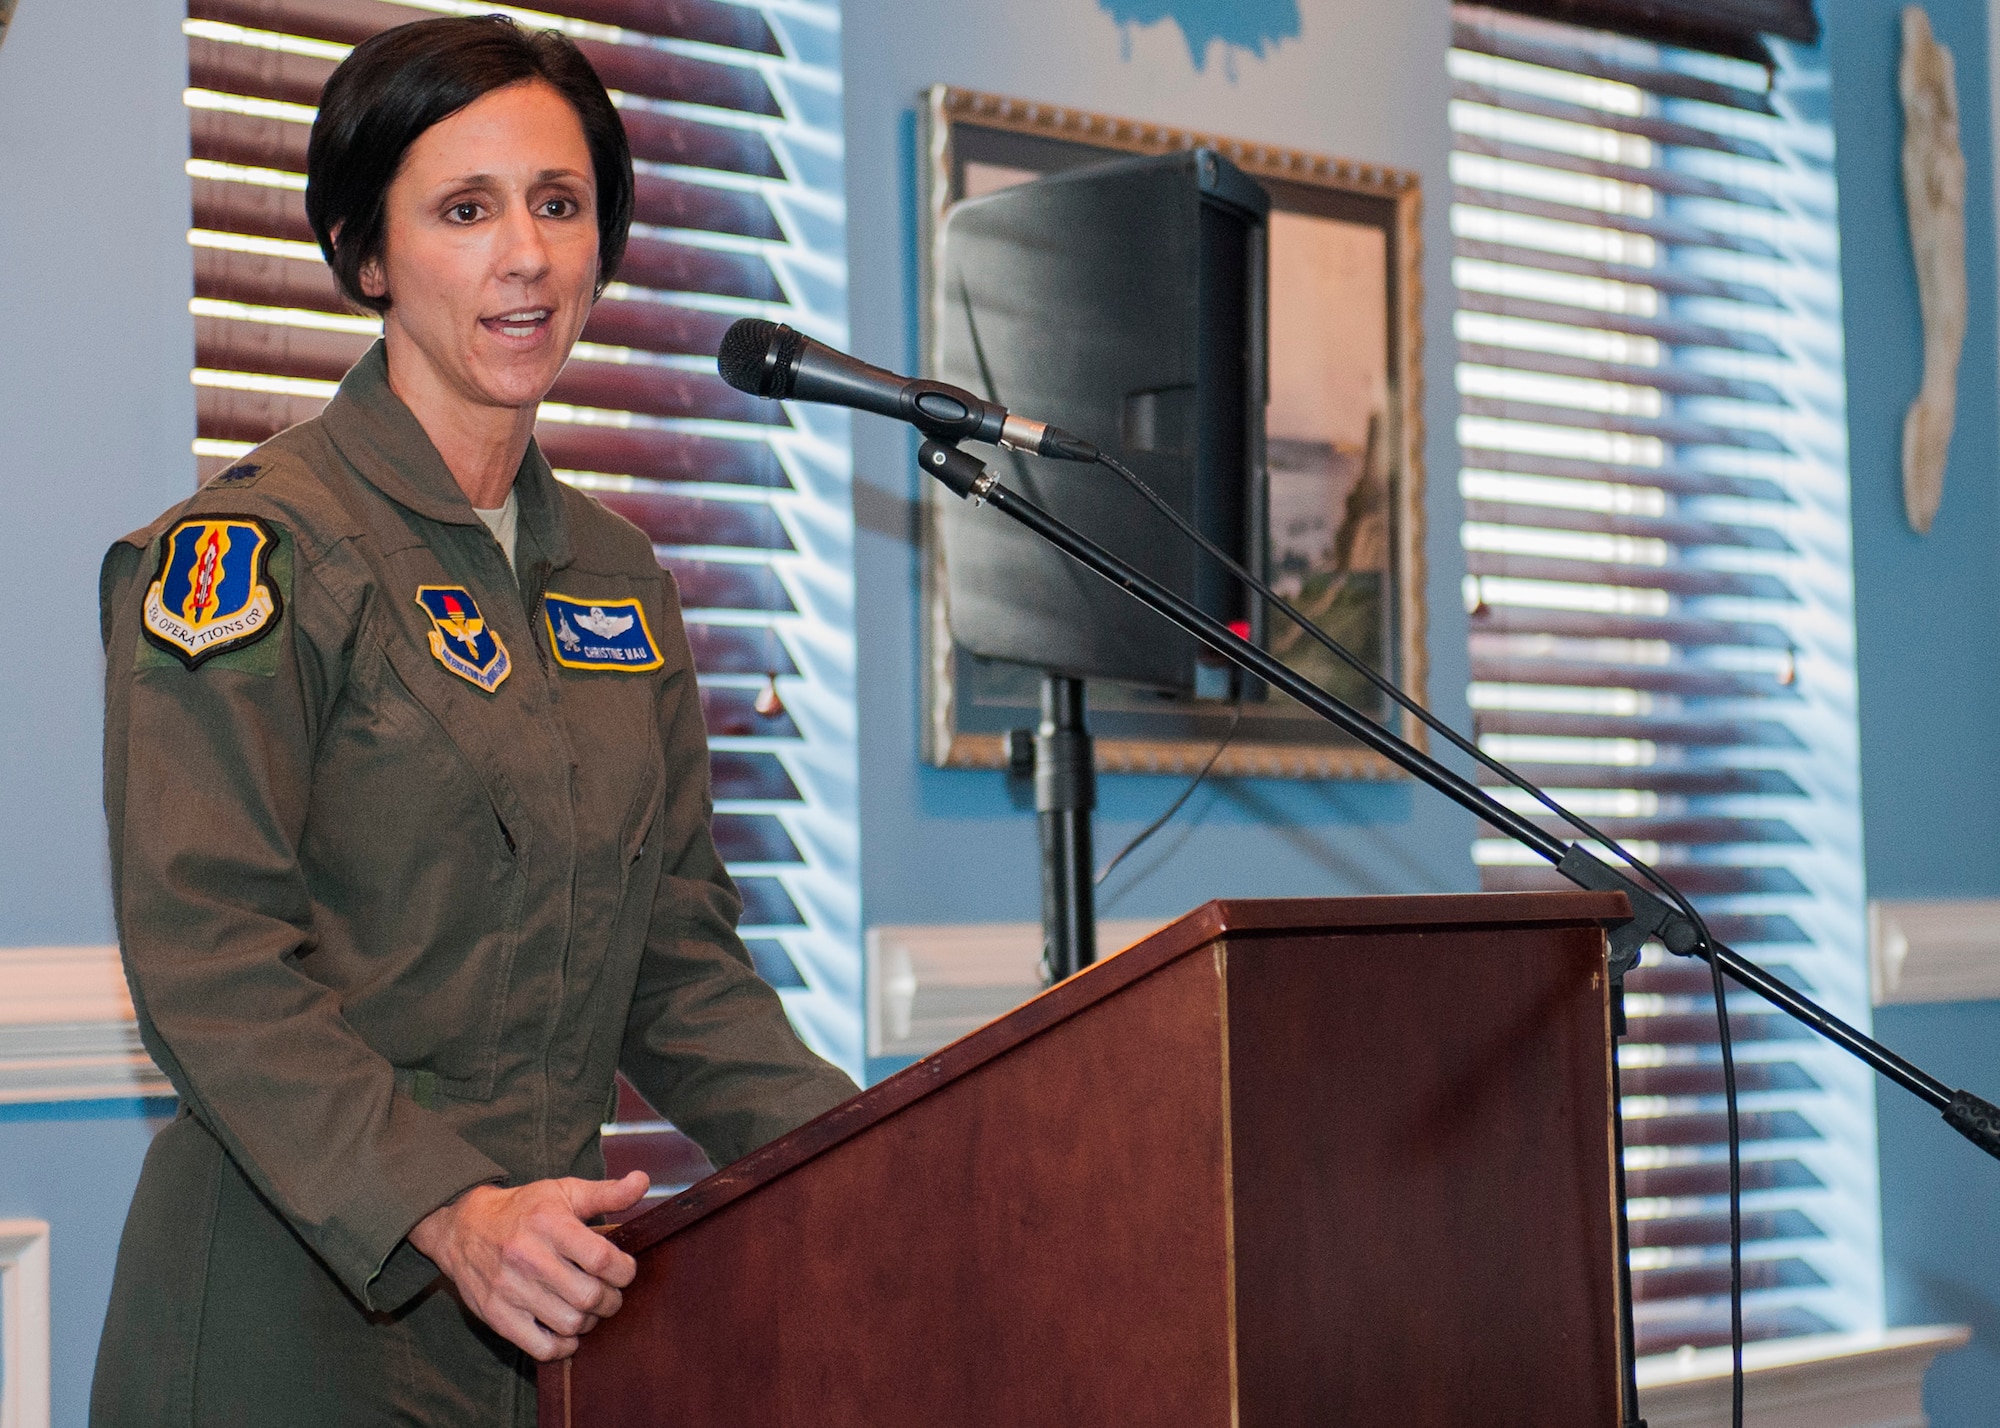 Lt. Col. Christine Mau, 33rd Fighter Wing Operations Group deputy commander, speaks during Eglin’s Women’s History Month luncheon March 31 in Valparaiso, Fla. Mau made aviation history here as the first female pilot to fly the F-35 Lighting II. (U.S. Air Force photo/Ilka Cole)